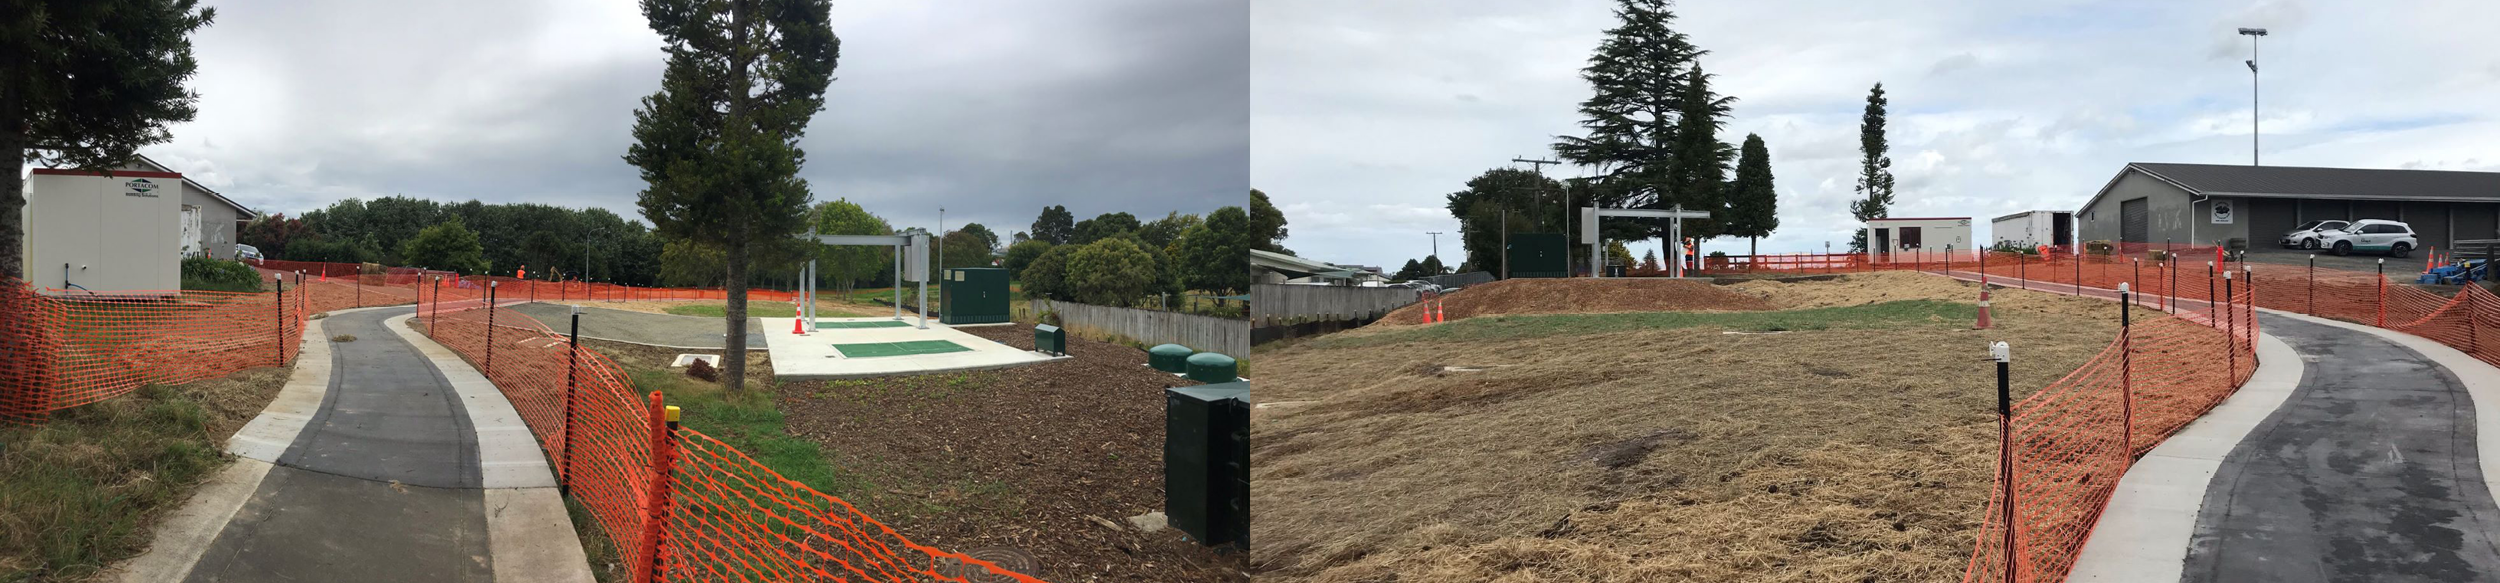 Photos of the new Albert Park Pump Station and mulched area that will be grassed in autumn.